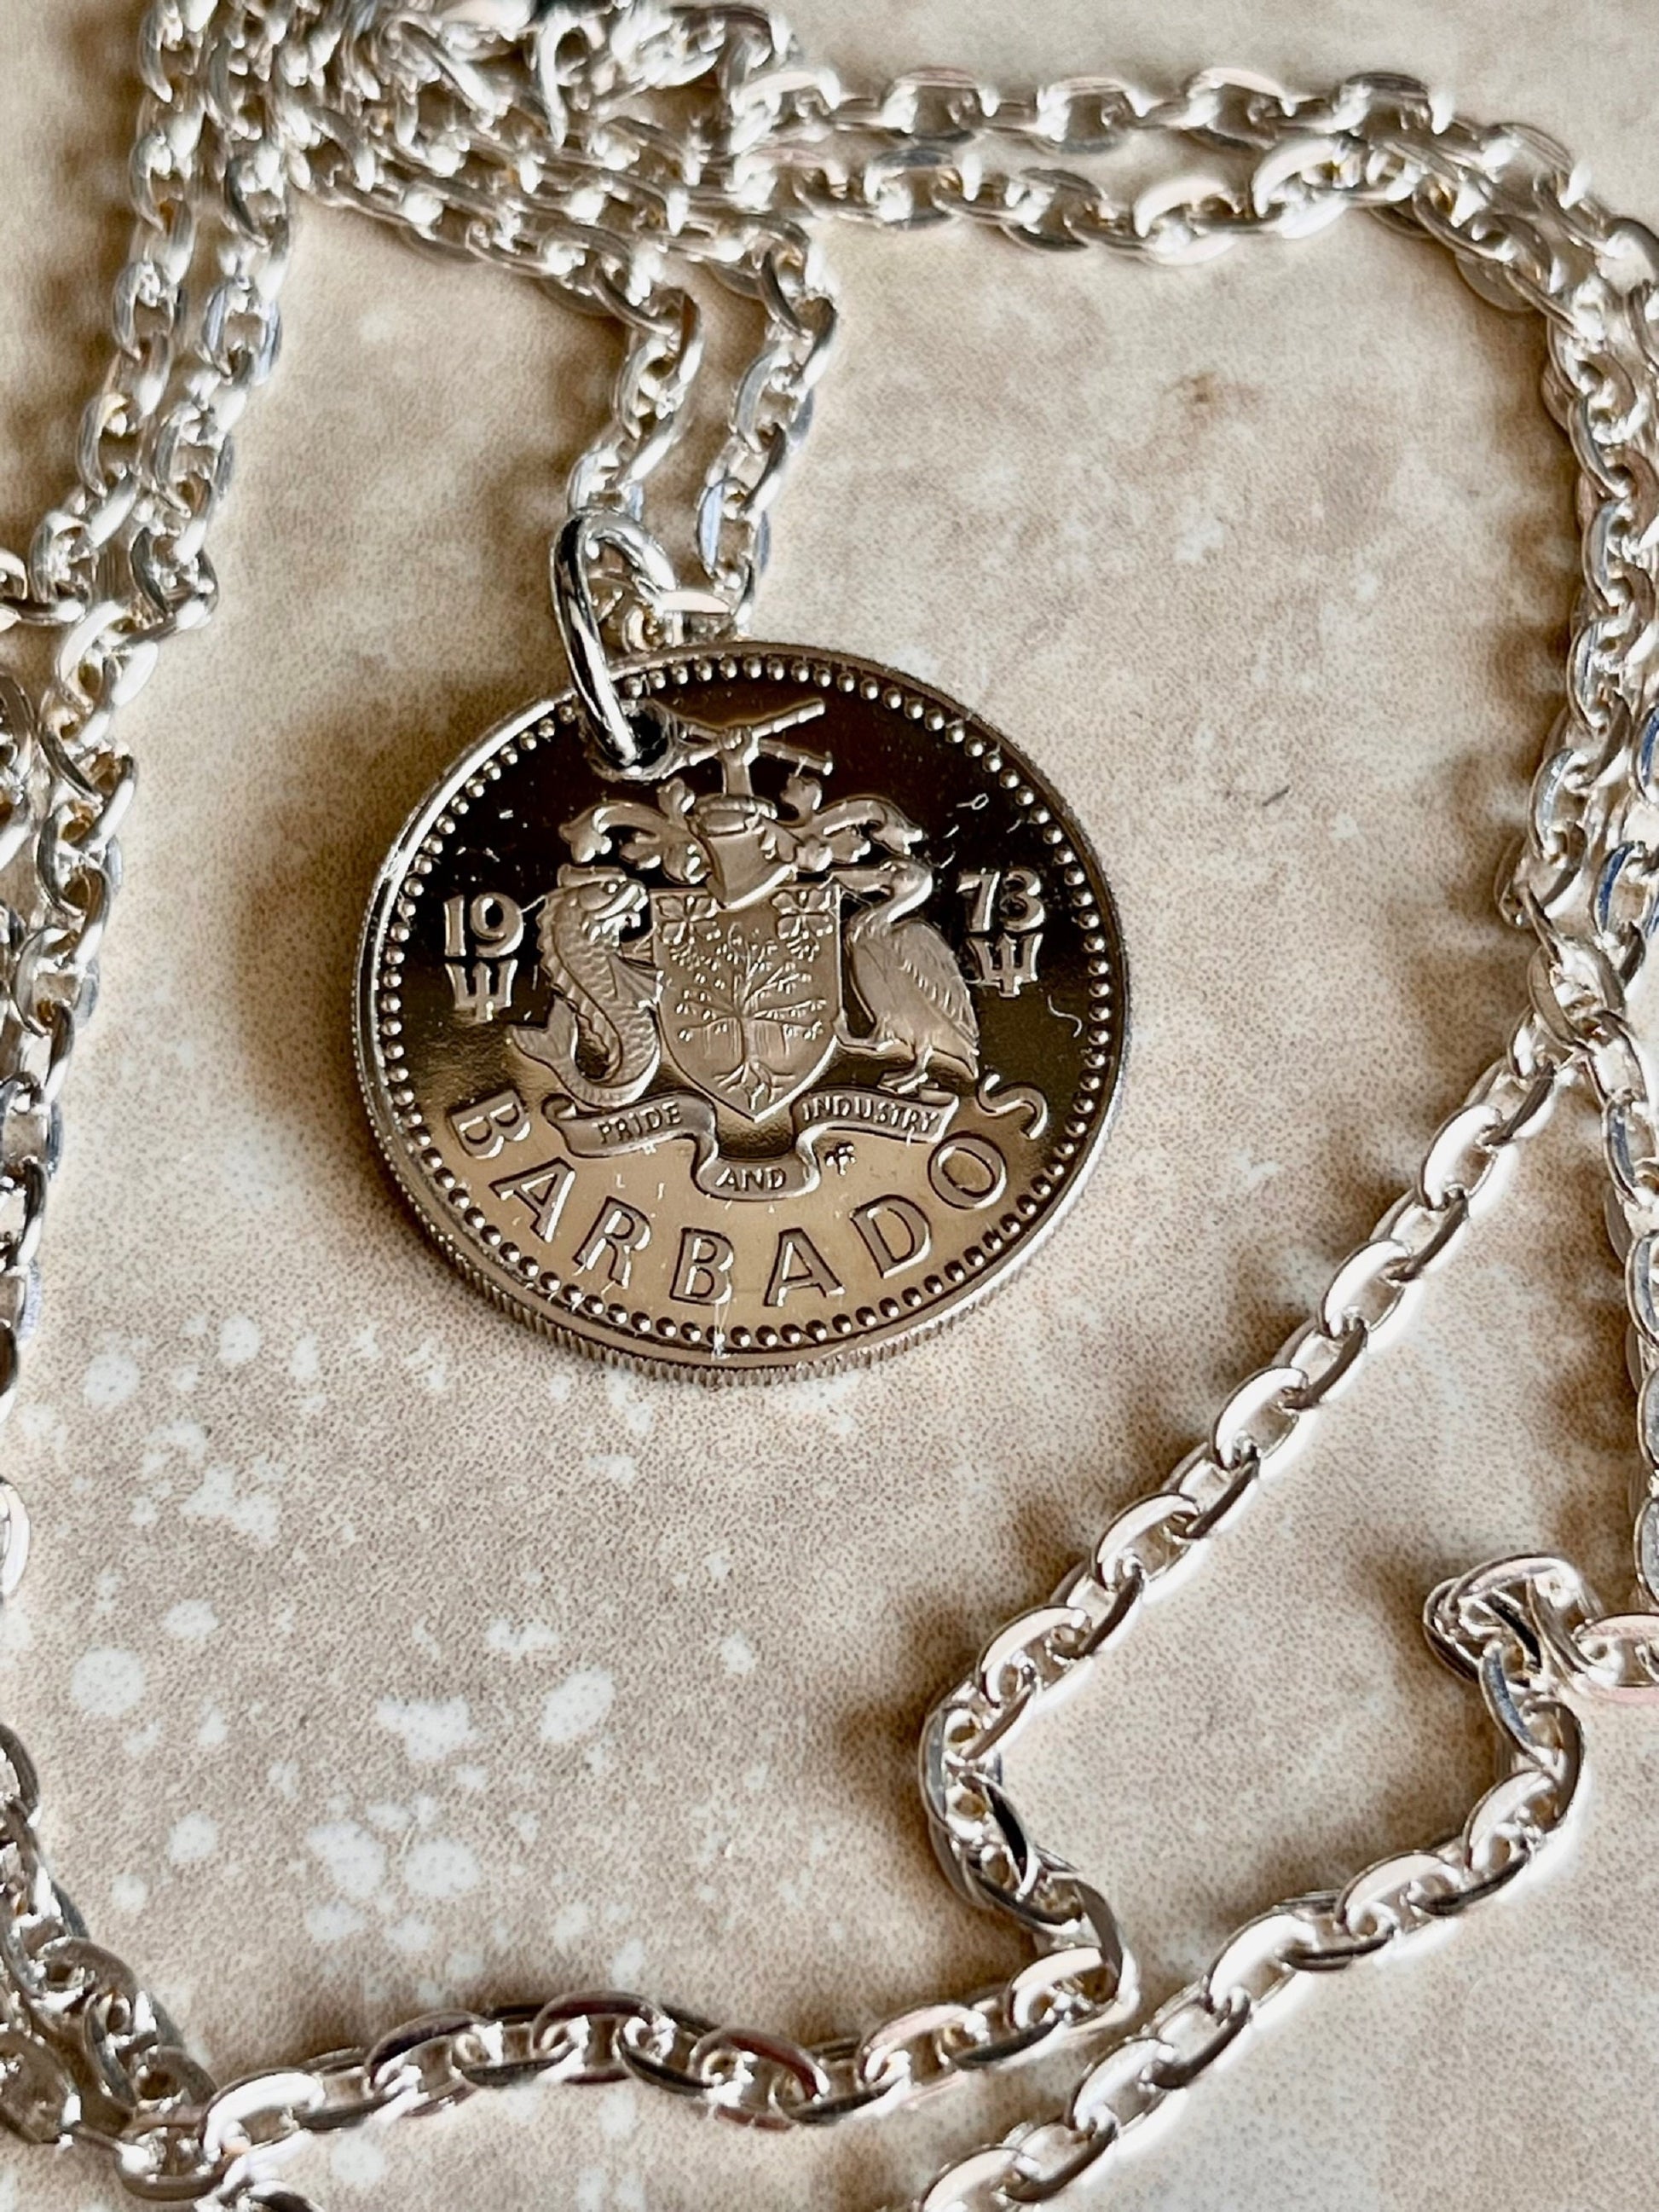 Barbados Pendant Coin Necklace From Proof Set 25 Cent Light House Custom Made Vintage and Rare coins - Coin Enthusiast - Fashion Accessory